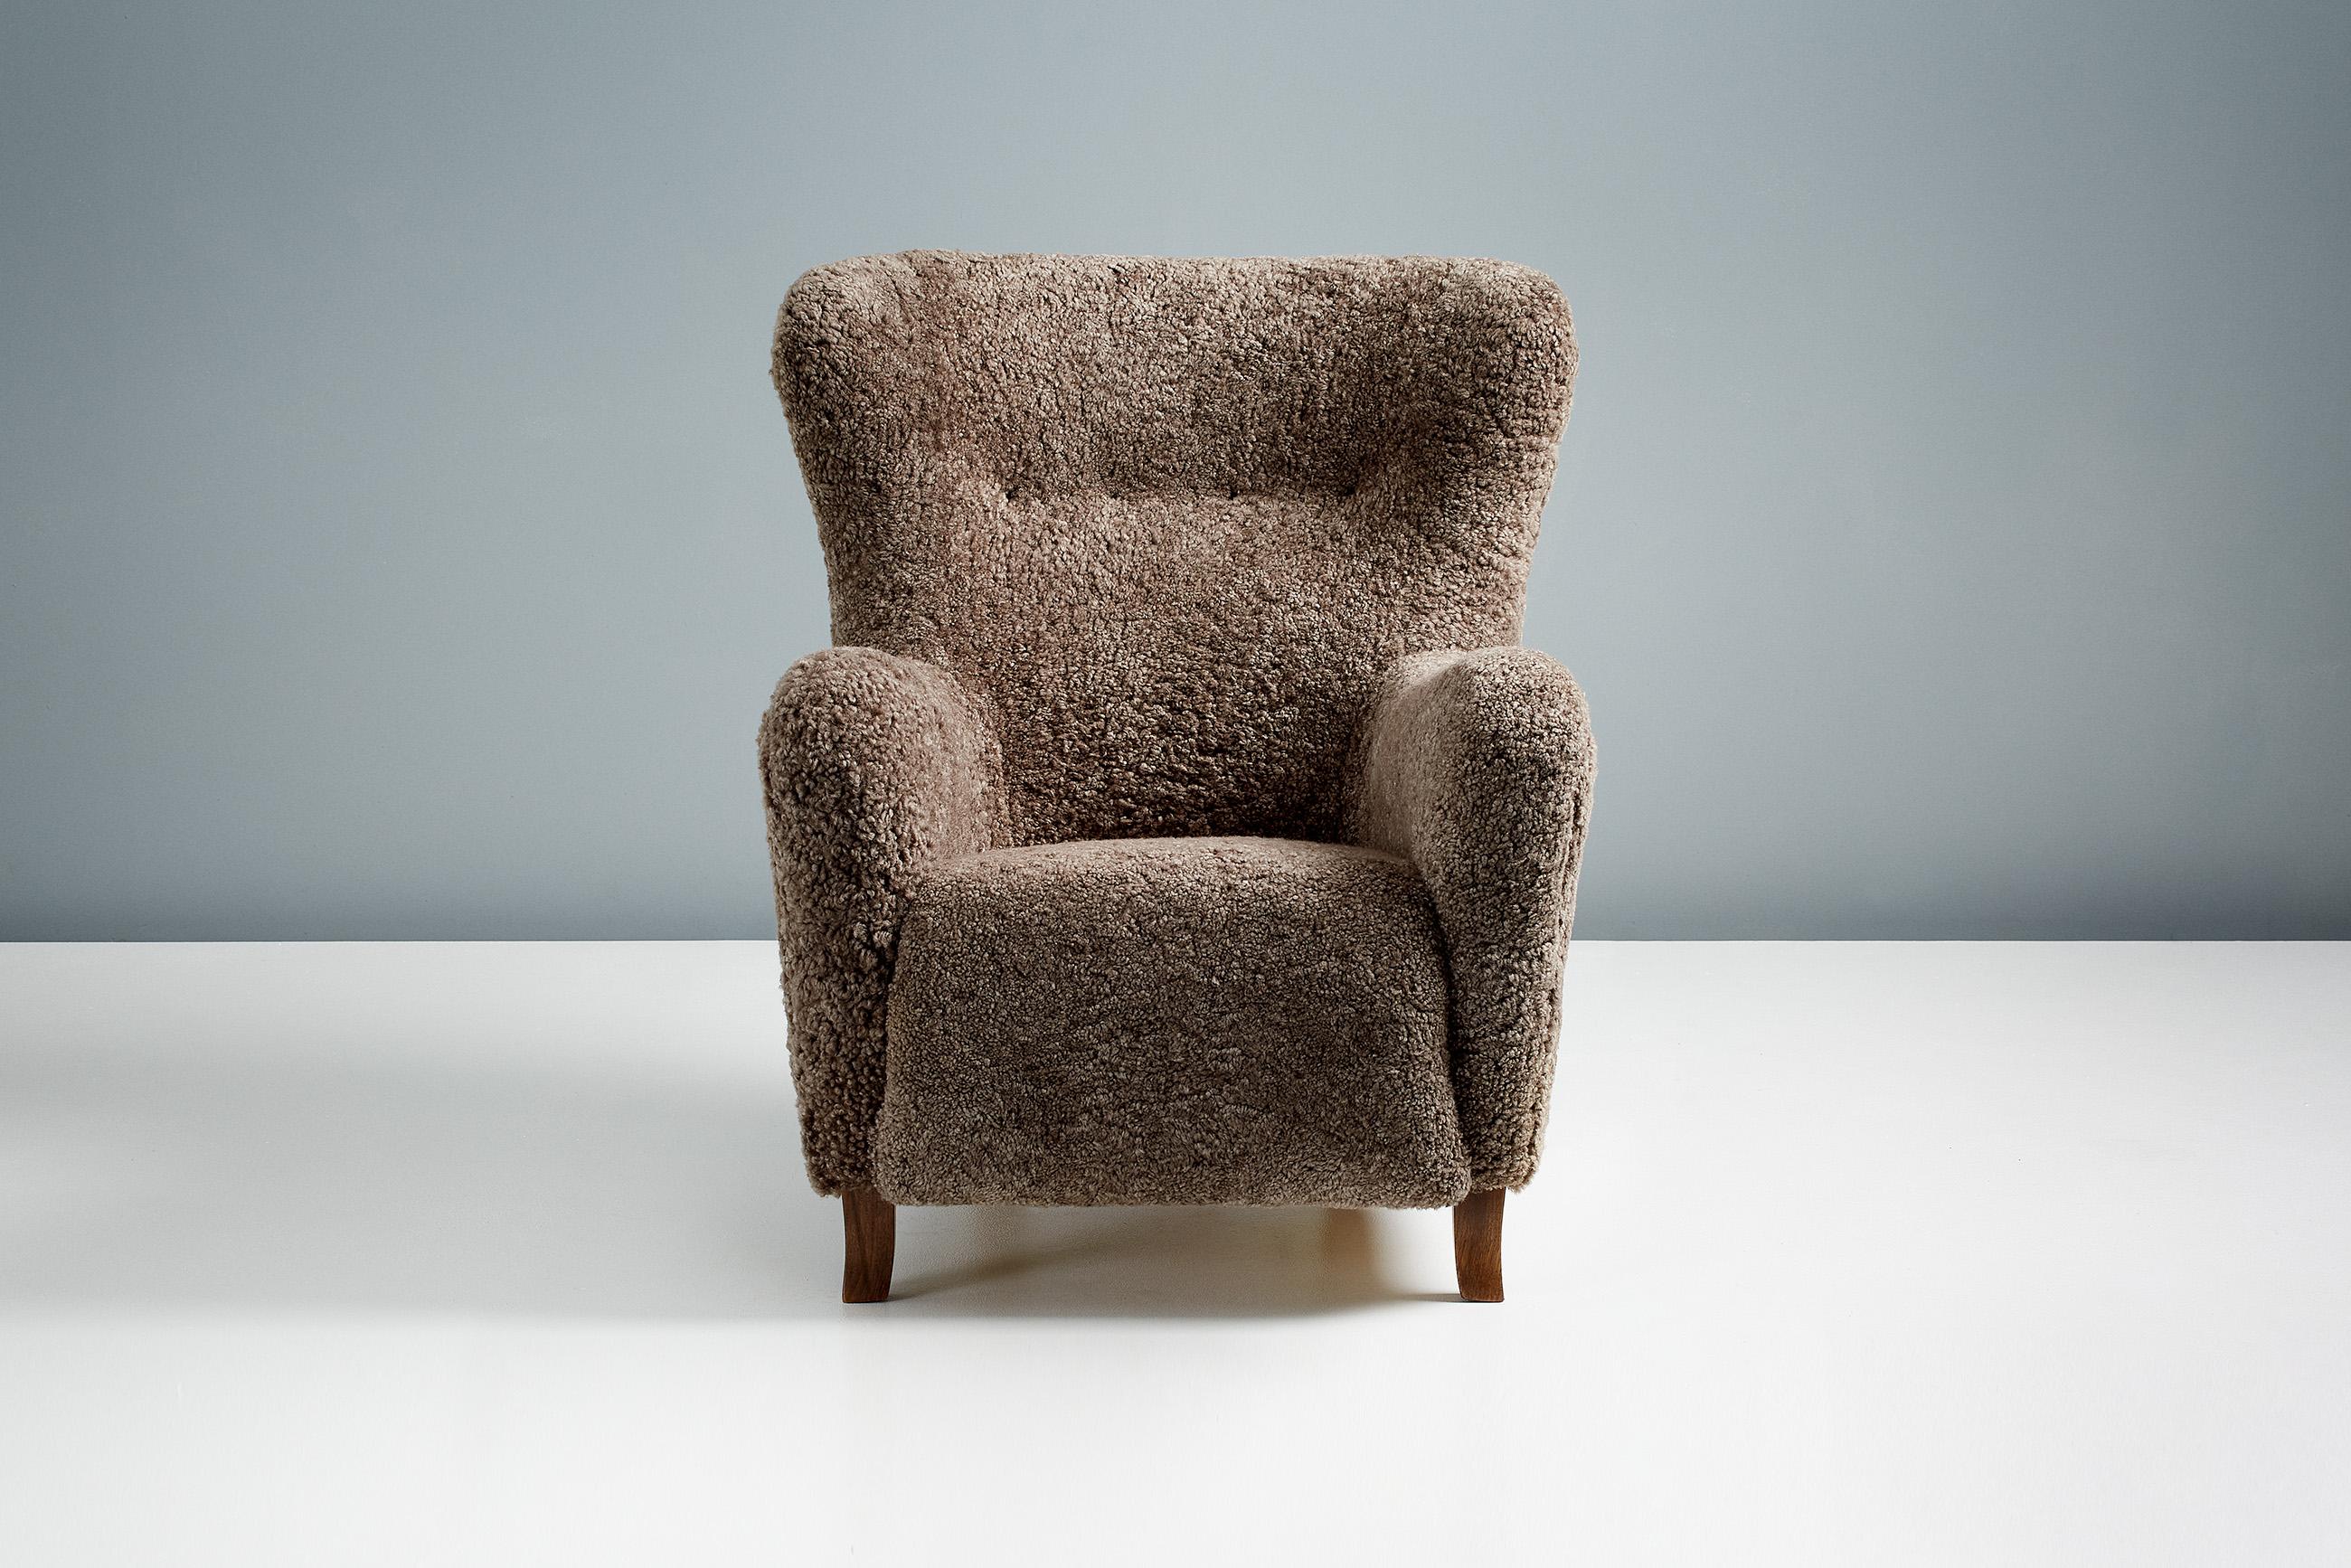 Dagmar Design

Sampo Wing chair

A custom-made wing chair developed & produced at our workshops in London using the highest quality materials. The frame is built from solid beech wood with a fully sprung seat. The Sampo chair is available to